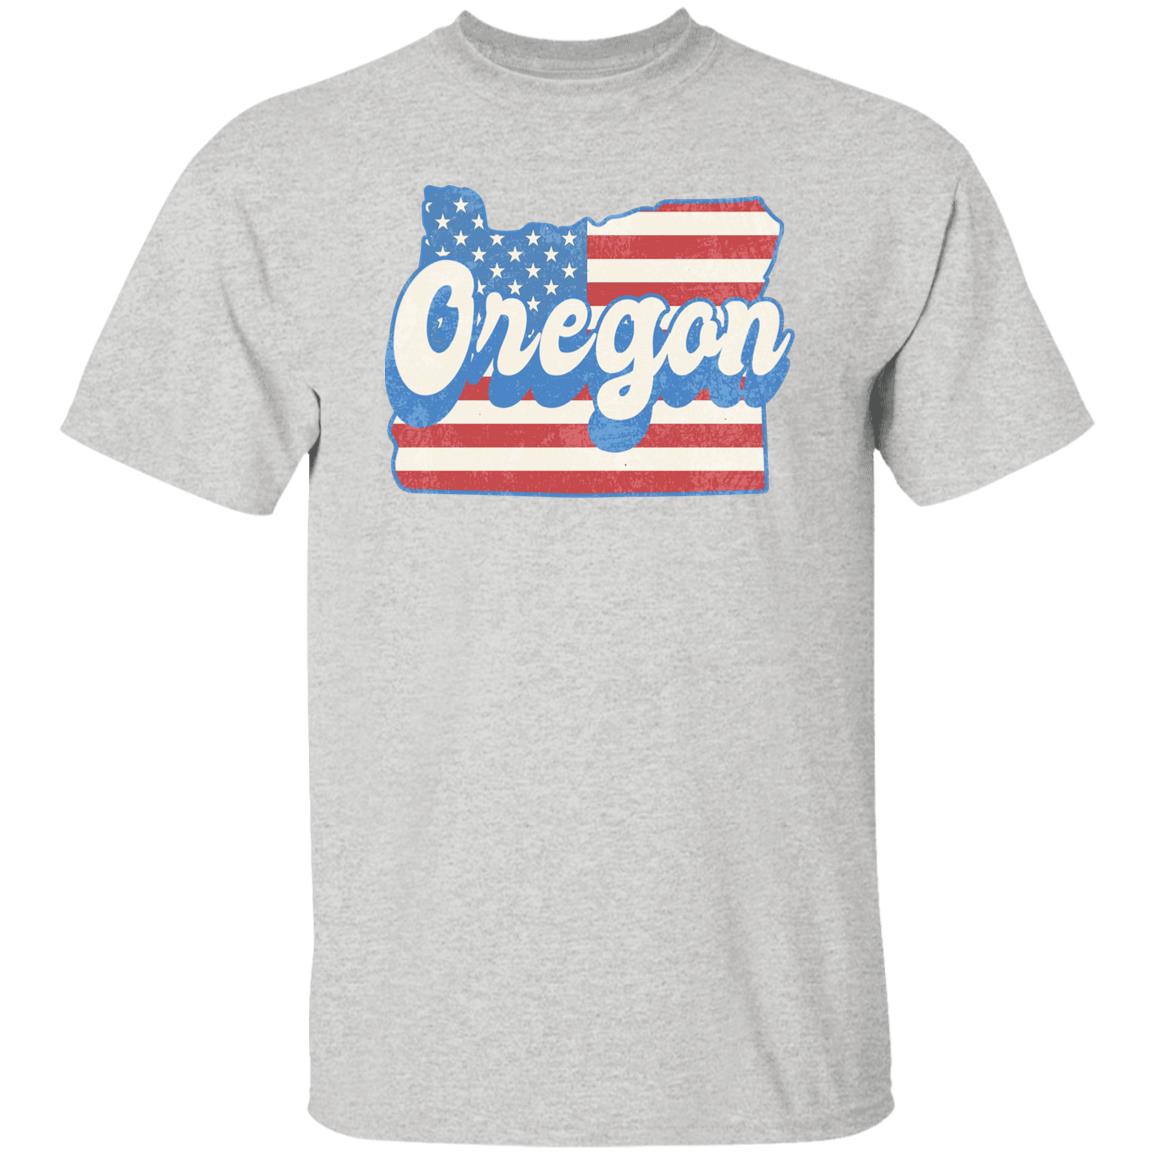 Oregon US flag Unisex T-Shirt American patriotic OR state tee White Ash Blue-Ash-Family-Gift-Planet